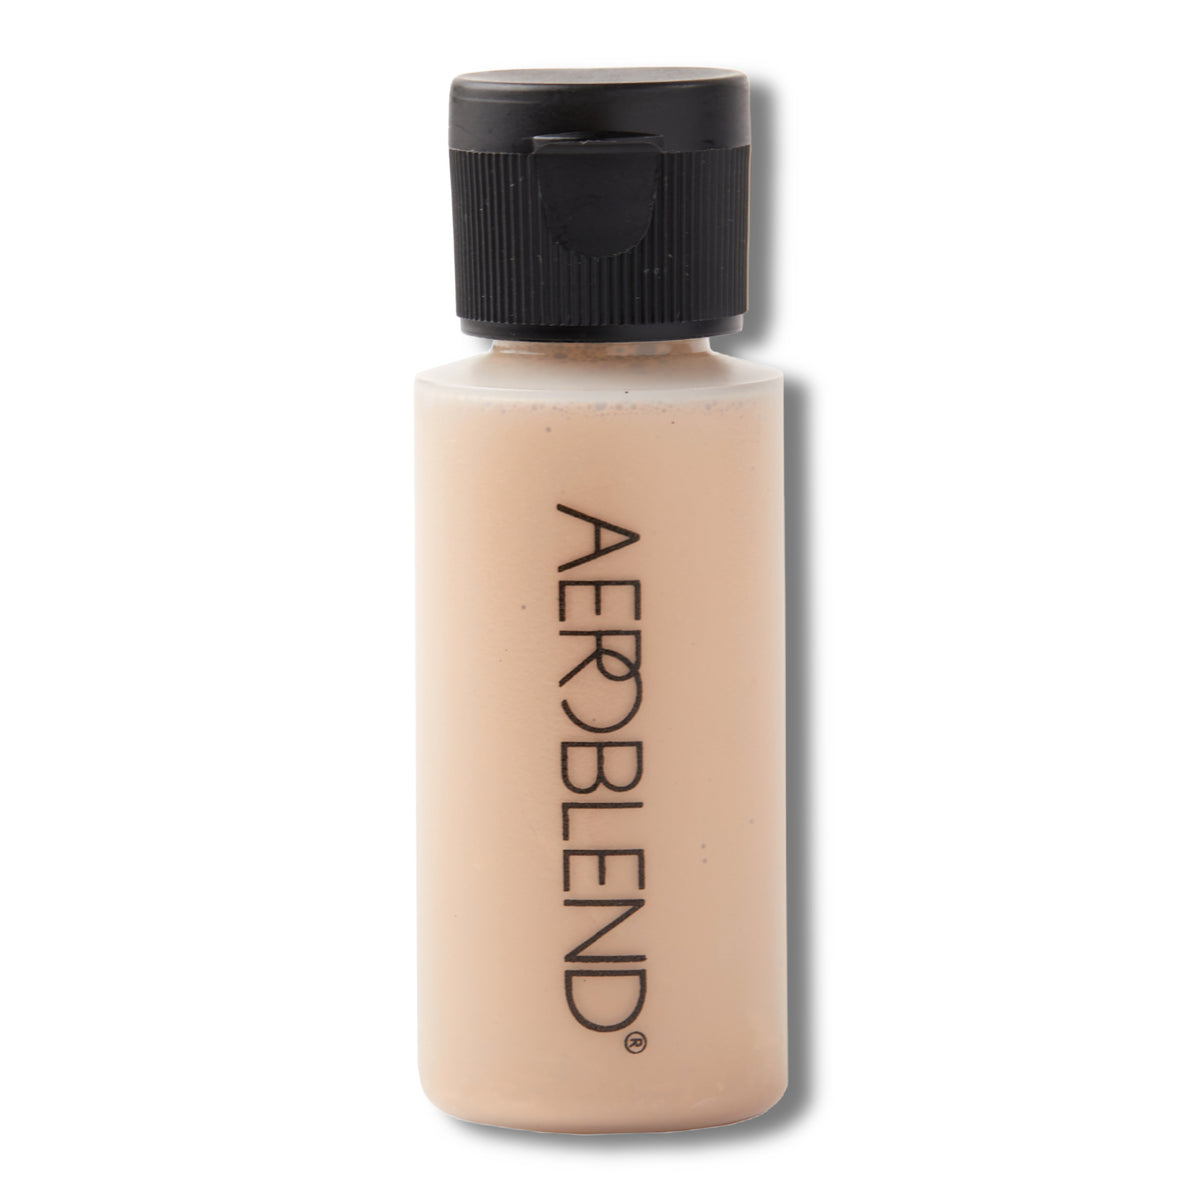 Achieve Flawless Skin with Aeroblend Airbrush Makeup by Nikki